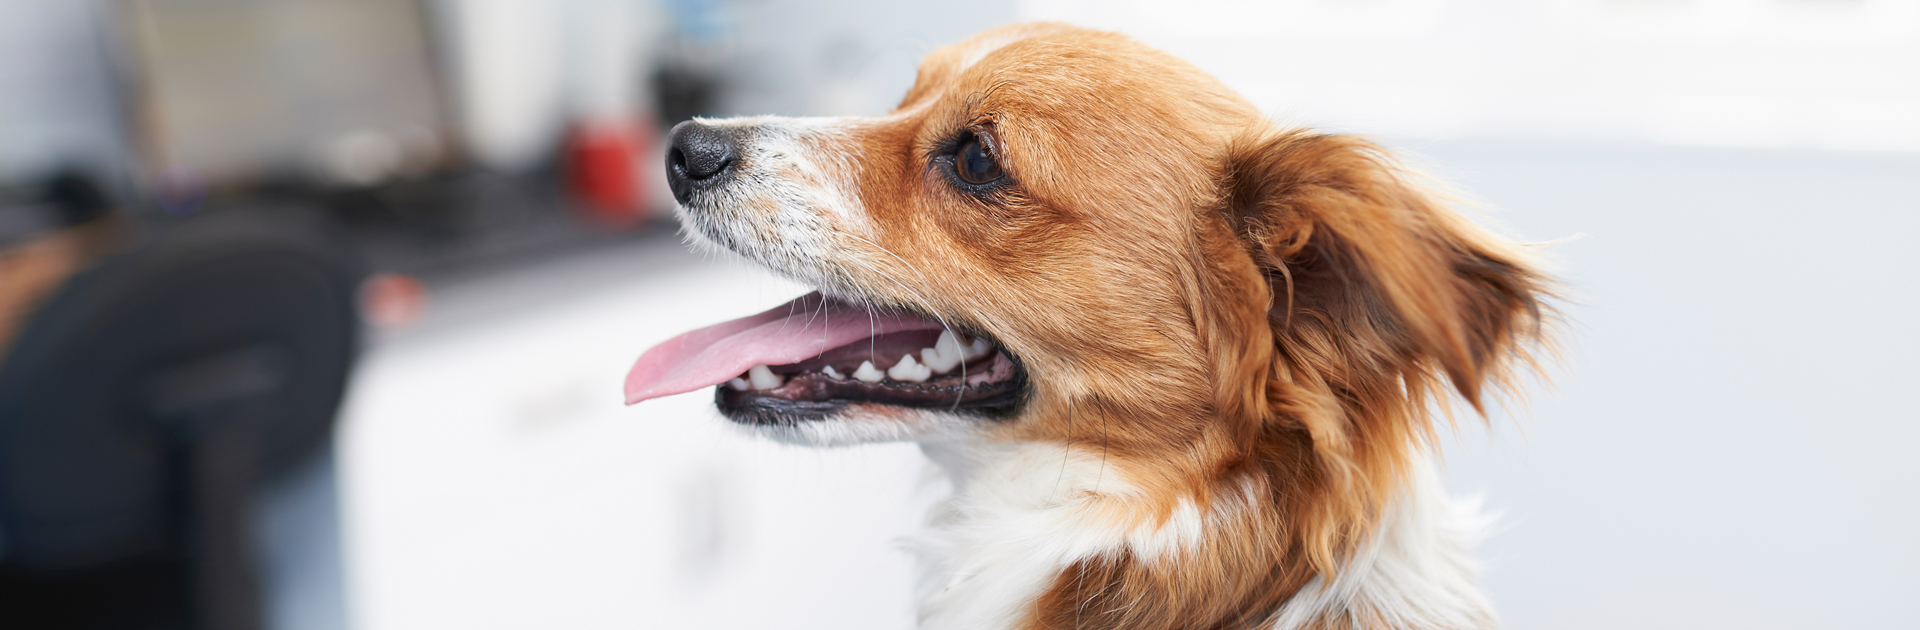 We care for pets in Seaford, East Sussex | Pet Doctors